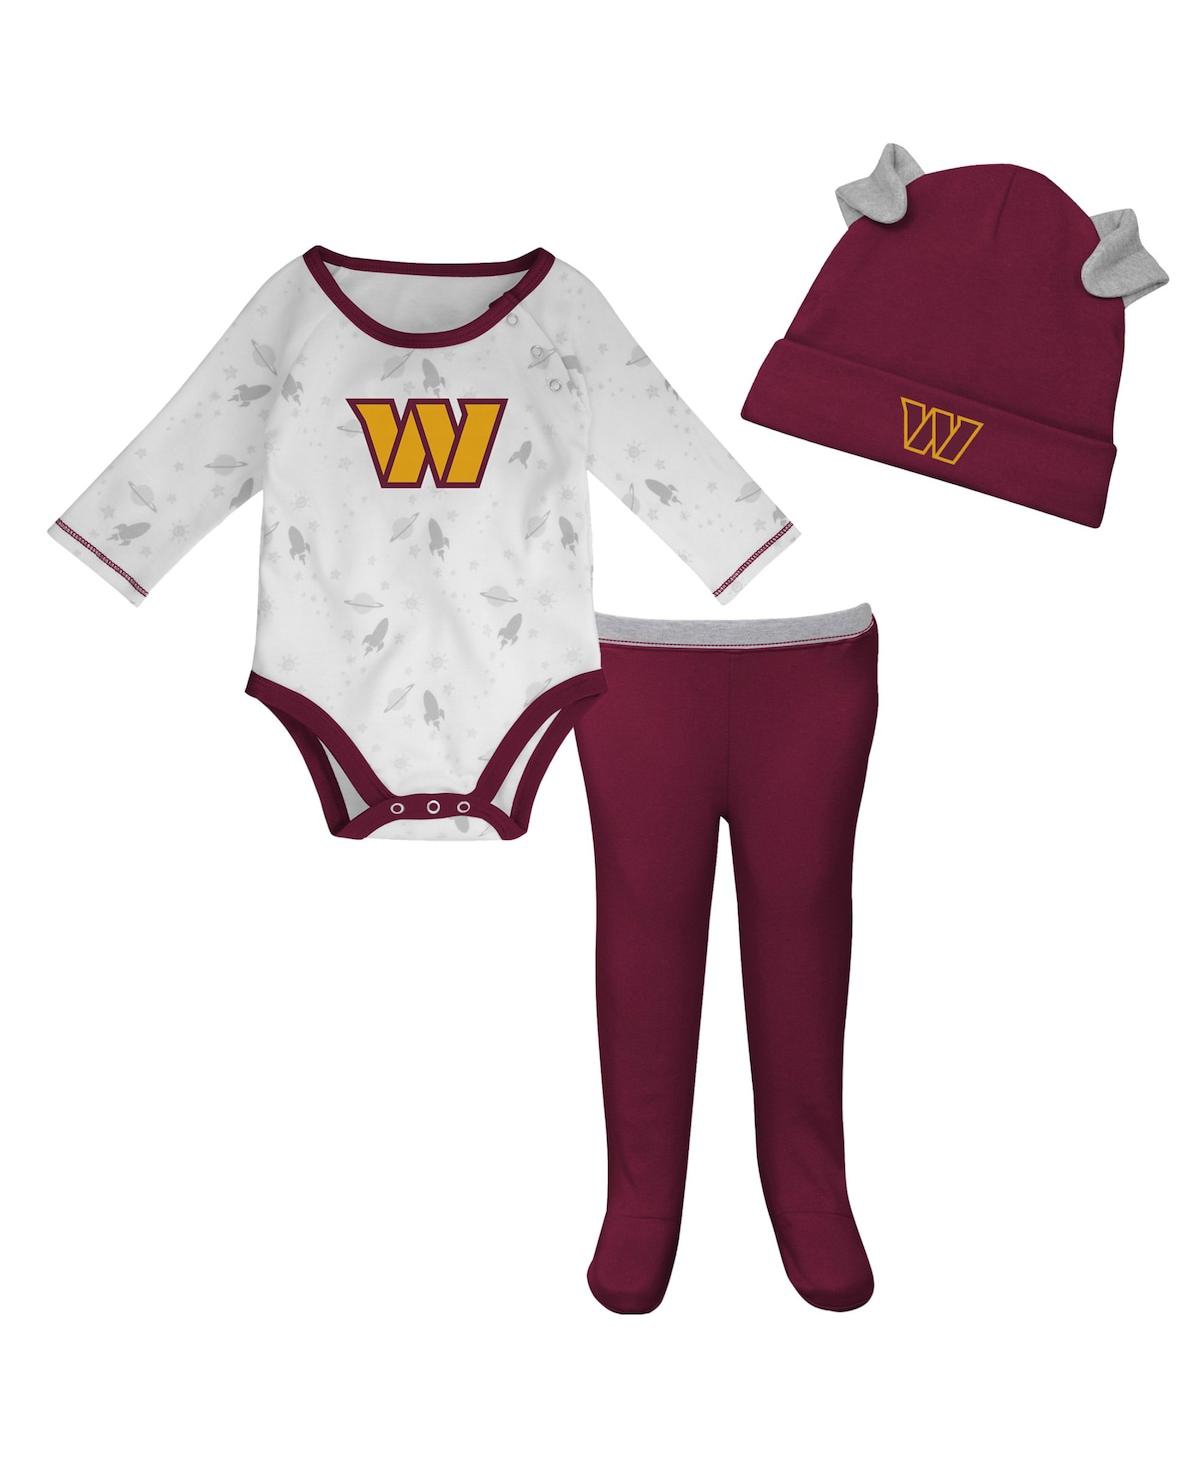 Shop Outerstuff Newborn And Infant Boys And Girls White, Burgundy Washington Commanders Dream Team Onesie Pants And  In White,burgundy